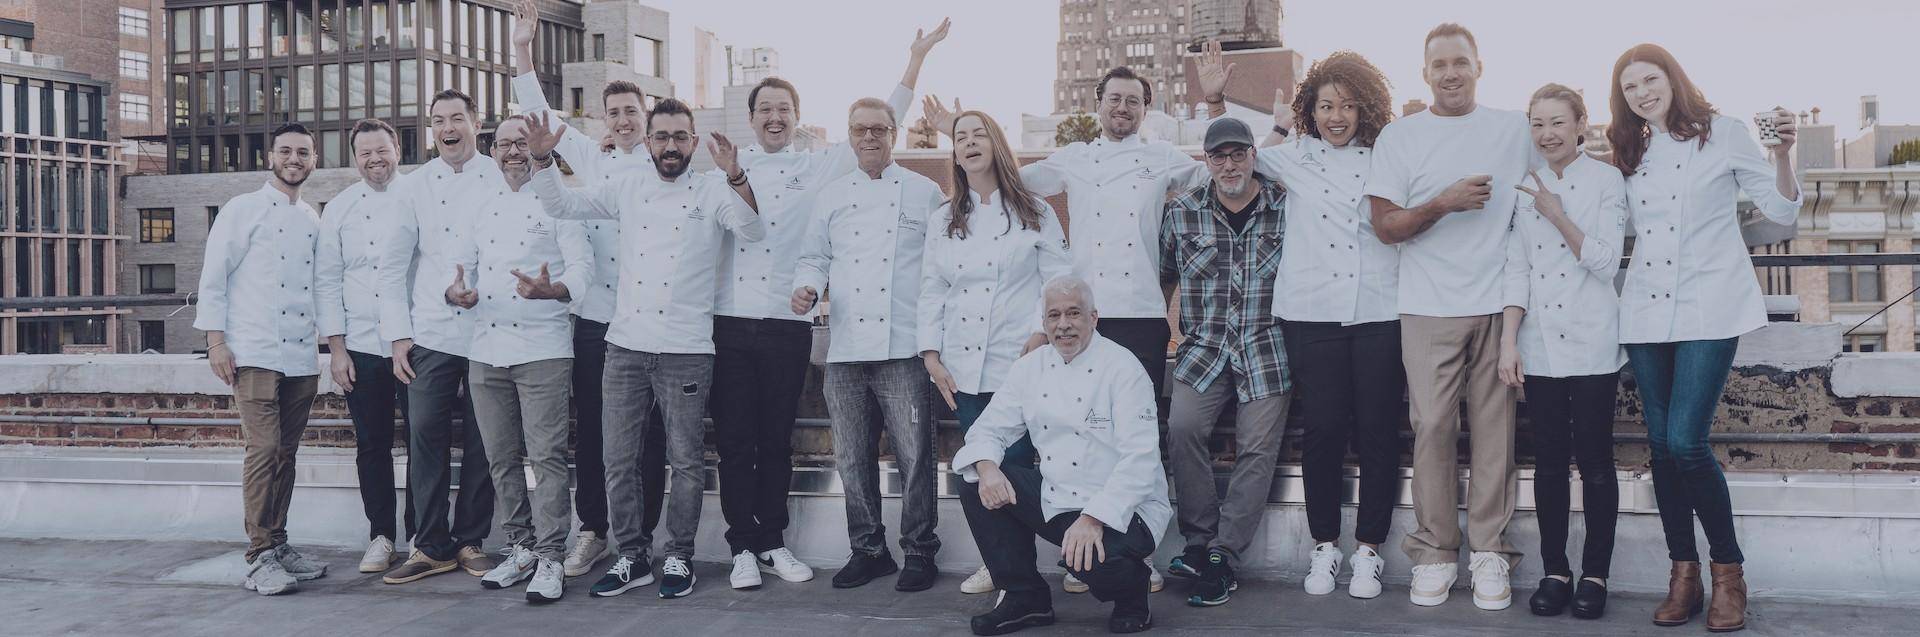 Group photo of the NA Ambassadors and Chefs on the roof of Chocolate Academy, New York